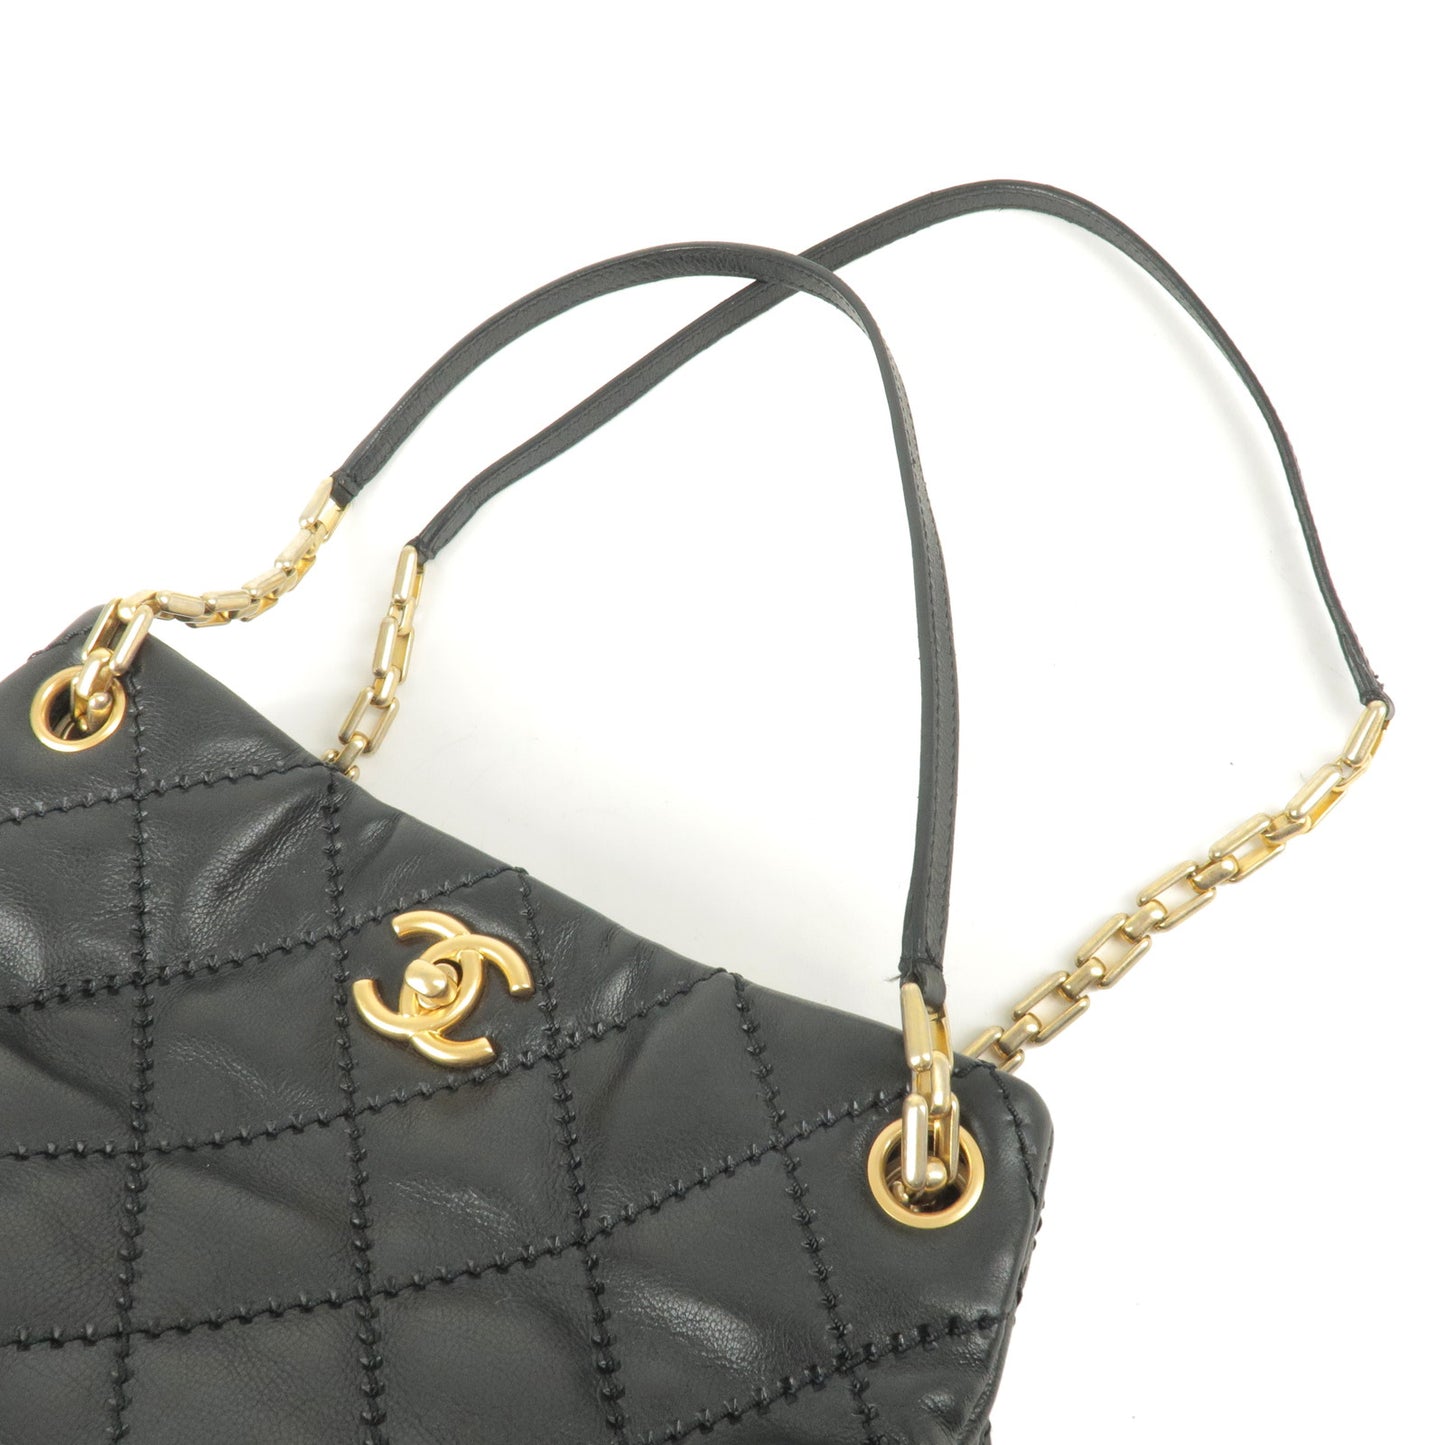 CHANEL Ultra Stitch Quilted Leather Chain Shoulder Bag Black